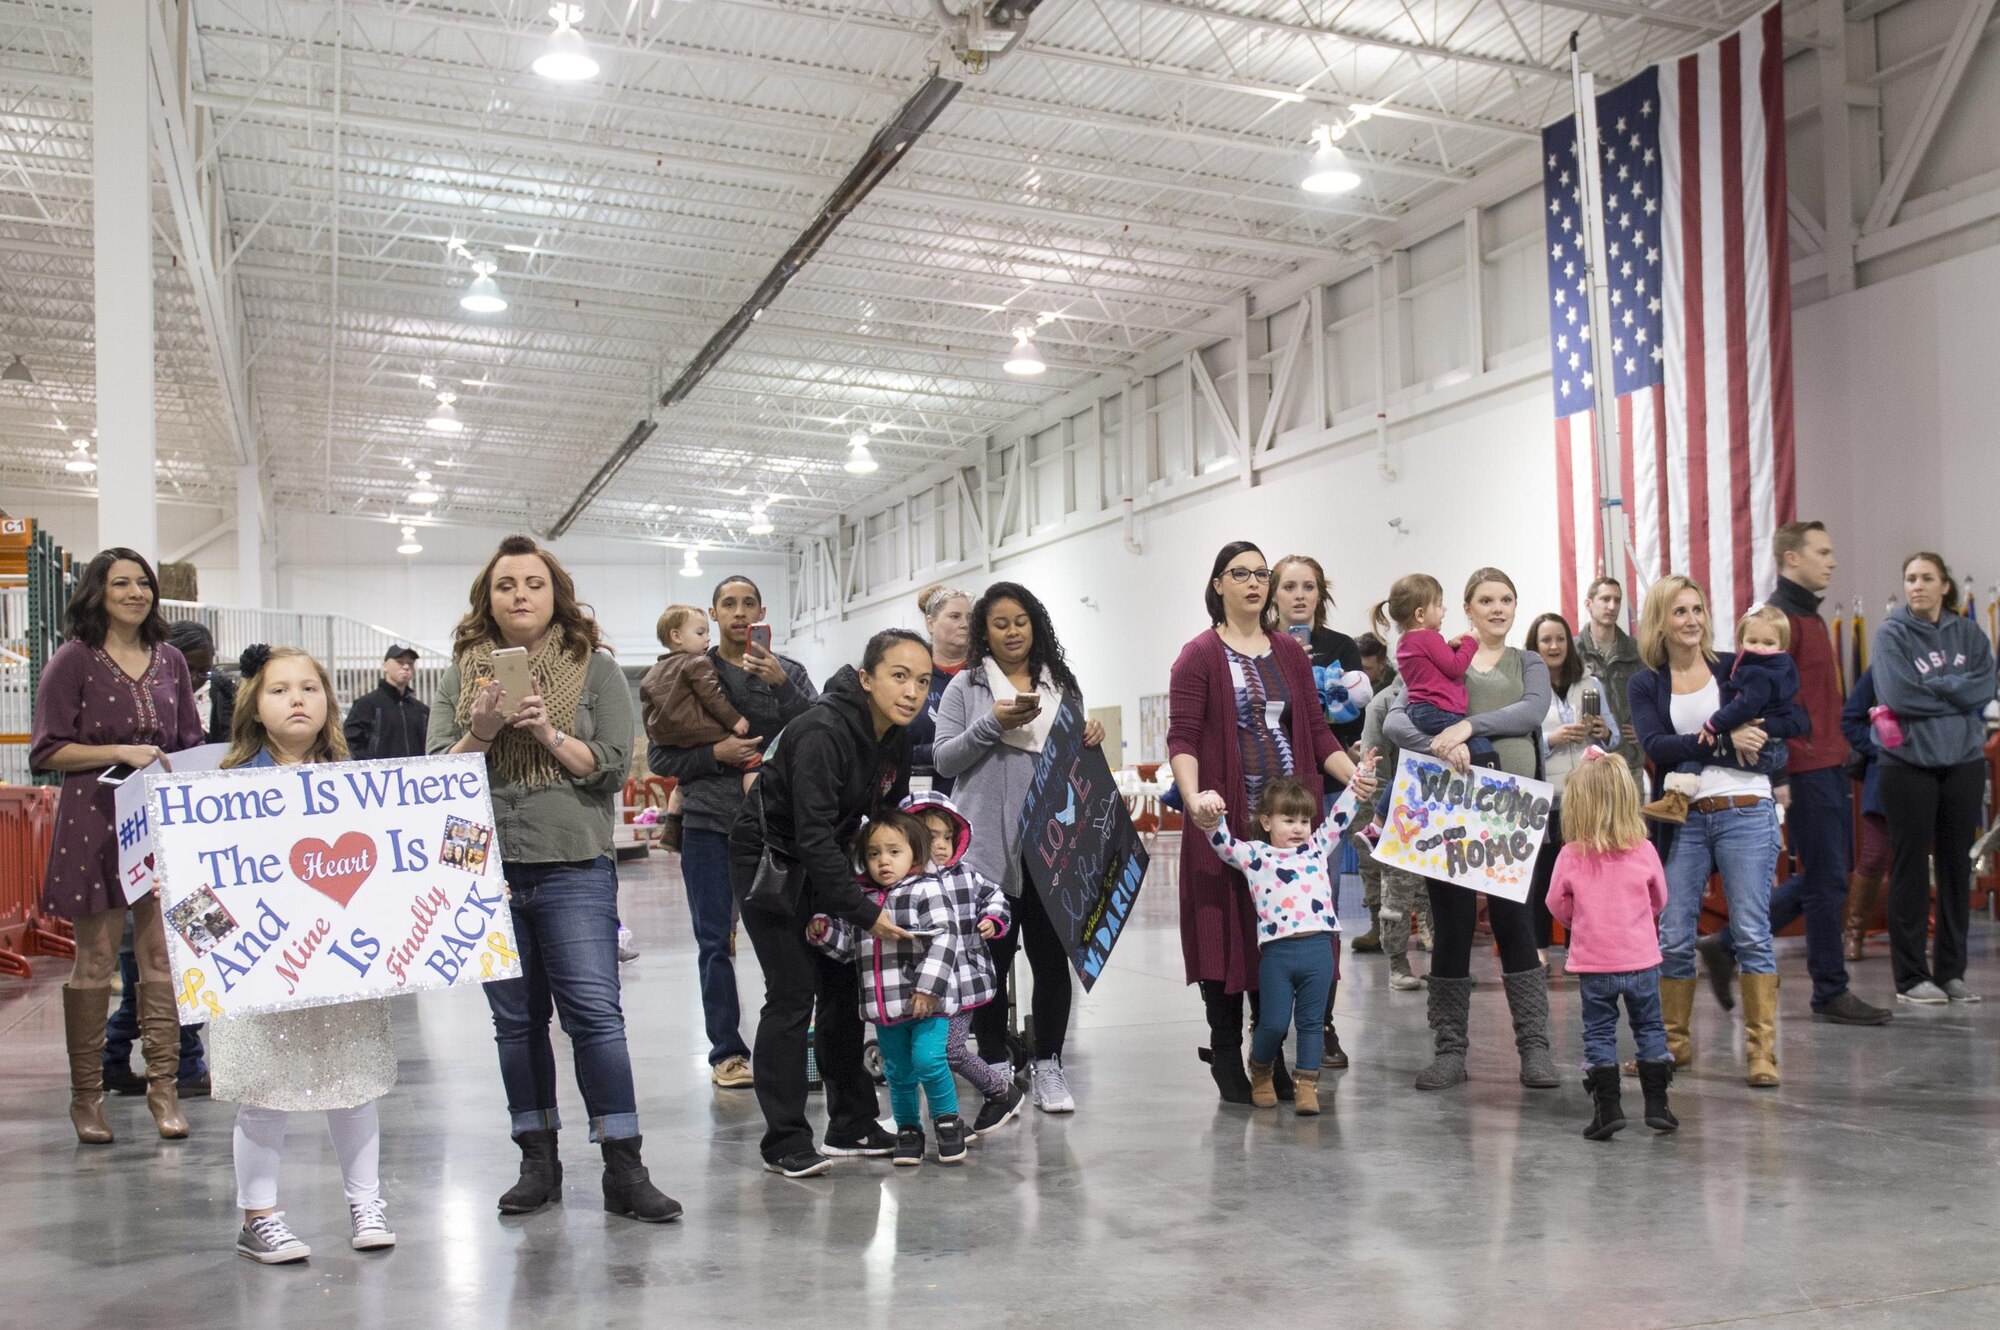 Family and friends await the return of Airmen from the 621st Contingency Response Wing, Jan. 14, 2017, at Travis Air Force Base, California. The Airmen were returning from a three-month deployment to Iraq, in support of Operation Inherent Resolve. (U.S. Air Force Photo by Tech. Sgt. Liliana Moreno)